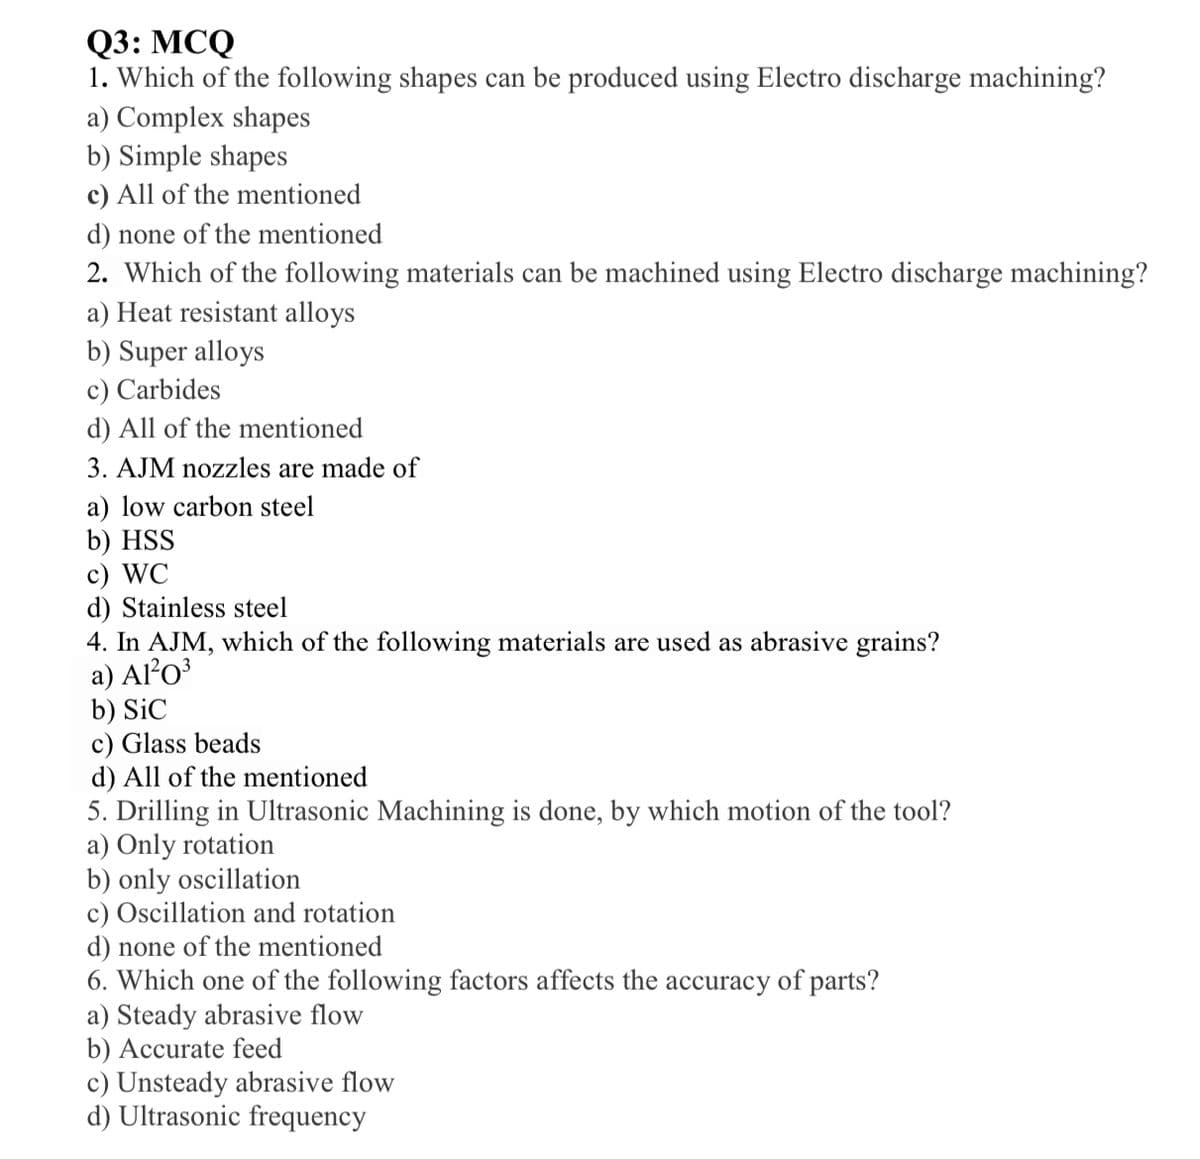 Q3: МСQ
1. Which of the following shapes can be produced using Electro discharge machining?
a) Complex shapes
b) Simple shapes
c) All of the mentioned
d) none of the mentioned
2. Which of the following materials can be machined using Electro discharge machining?
a) Heat resistant alloys
b) Super alloys
c) Carbides
d) All of the mentioned
3. AJM nozzles are made of
a) low carbon steel
b) HSS
c) WC
d) Stainless steel
4. In AJM, which of the following materials are used as abrasive grains?
a) AlO³
b) SiC
c) Glass beads
d) All of the mentioned
5. Drilling in Ultrasonic Machining is done, by which motion of the tool?
a) Only rotation
b) only oscillation
c) Oscillation and rotation
d) none of the mentioned
6. Which one of the following factors affects the accuracy of parts?
a) Steady abrasive flow
b) Accurate feed
c) Unsteady abrasive flow
d) Ultrasonic frequency
